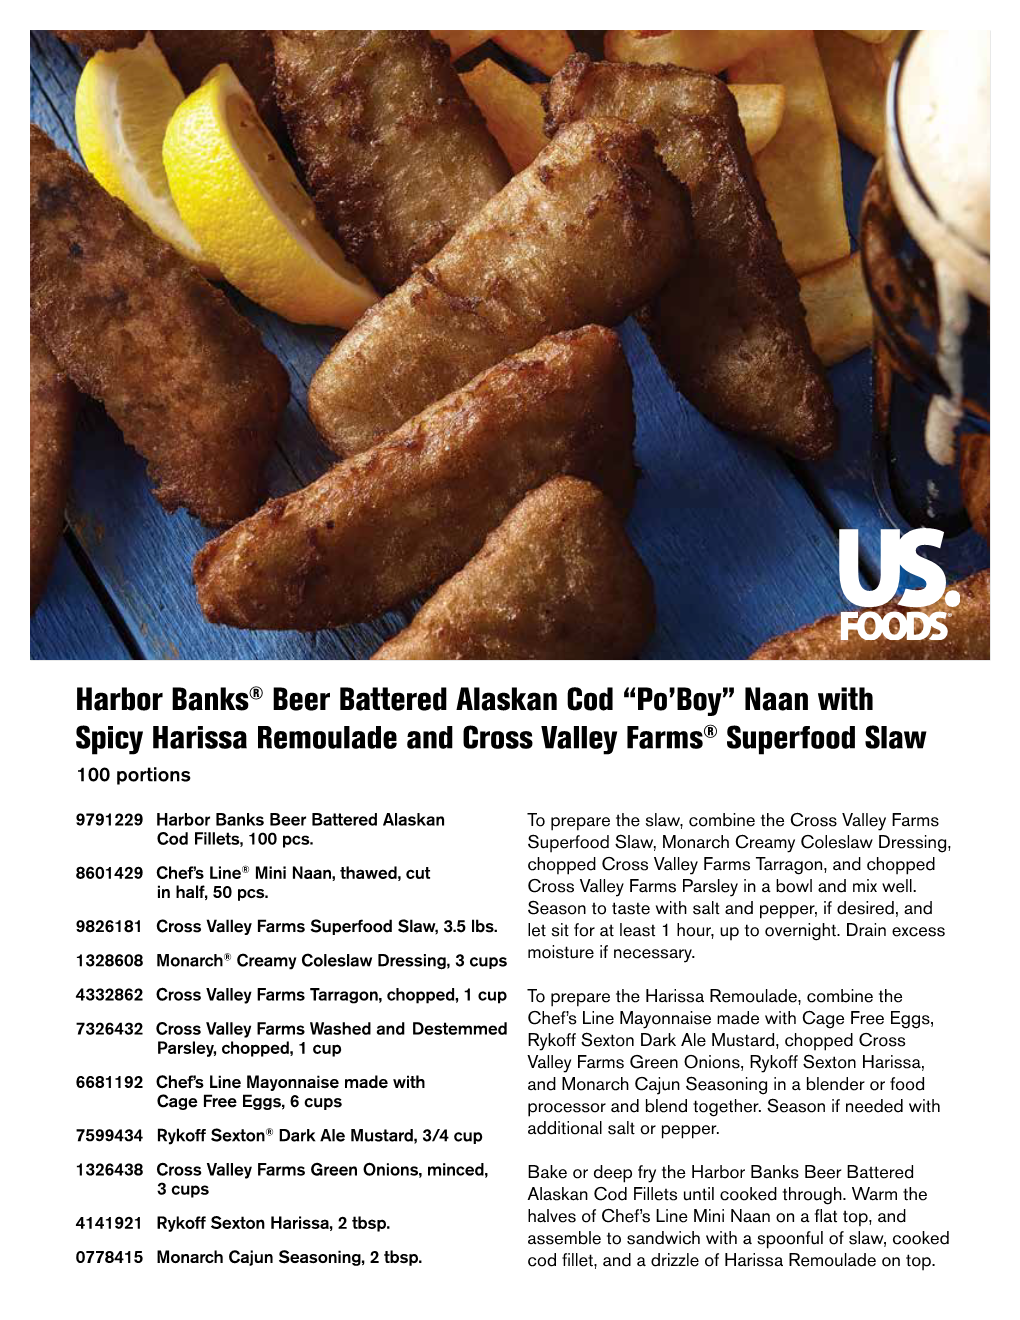 Harbor Banks® Beer Battered Alaskan Cod “Po'boy” Naan with Spicy Harissa Remoulade and Cross Valley Farms® Superfood